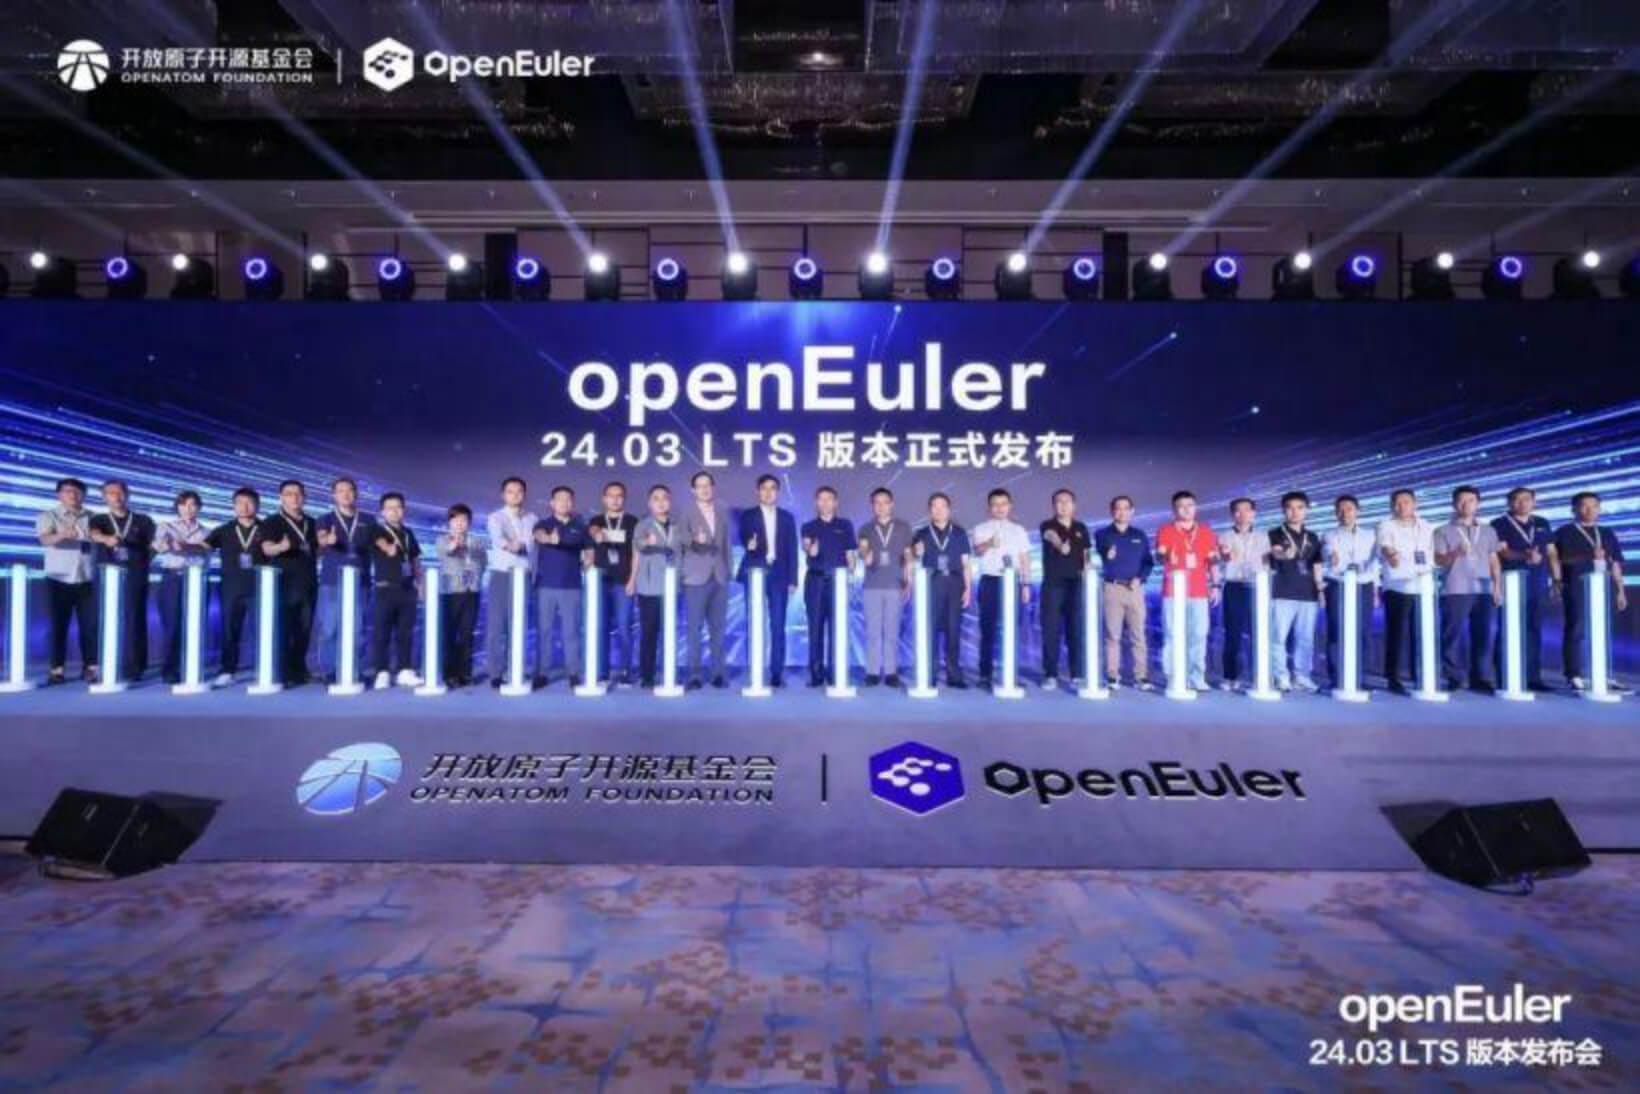 Huawei Bets Huge on Cloud and AI Deployments With openEuler 24.03 LTS Launch